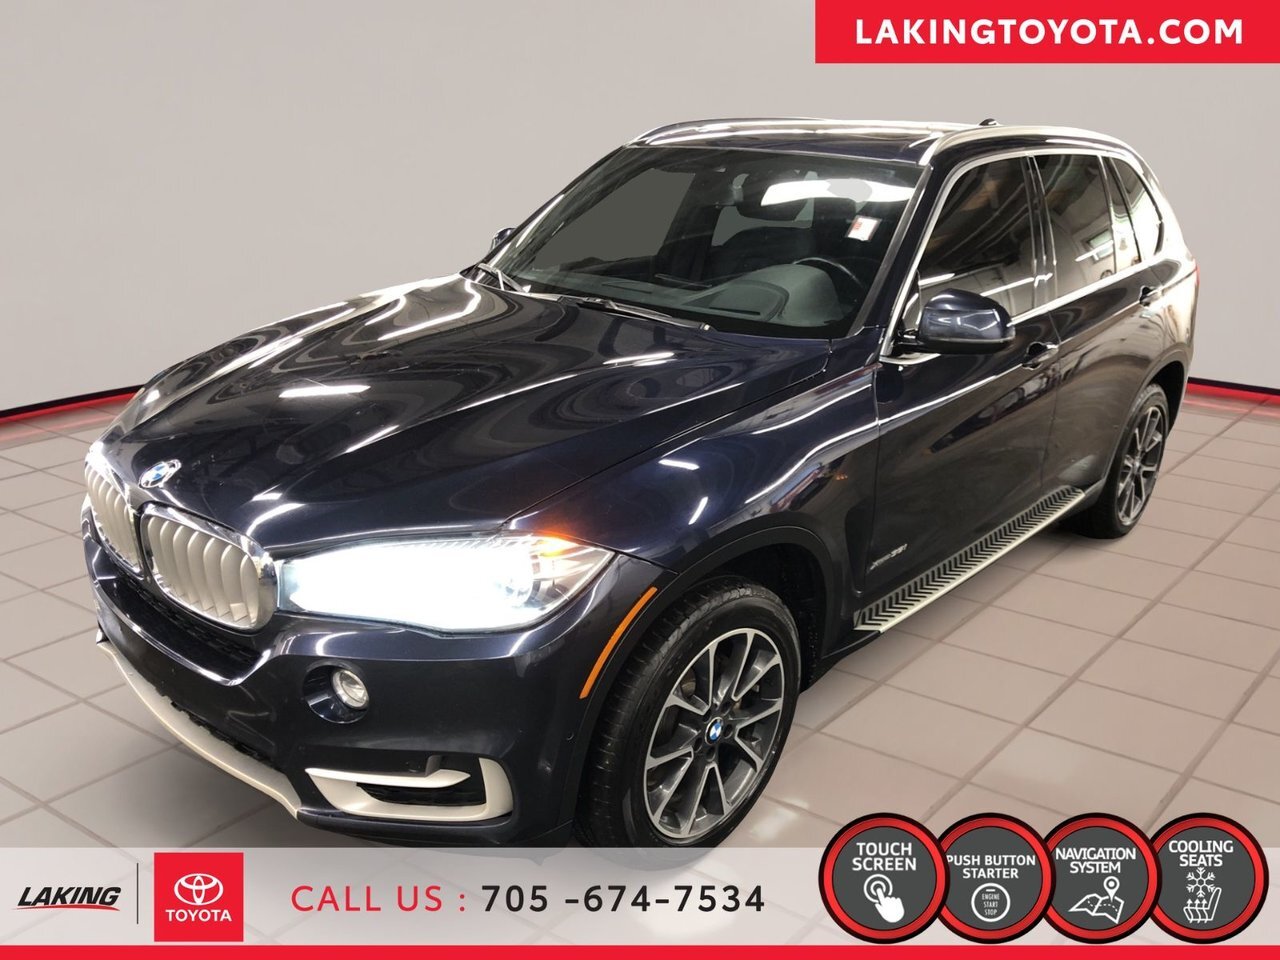 2017 BMW X5 XDrive35i All Wheel Drive This X5 delivers strong 